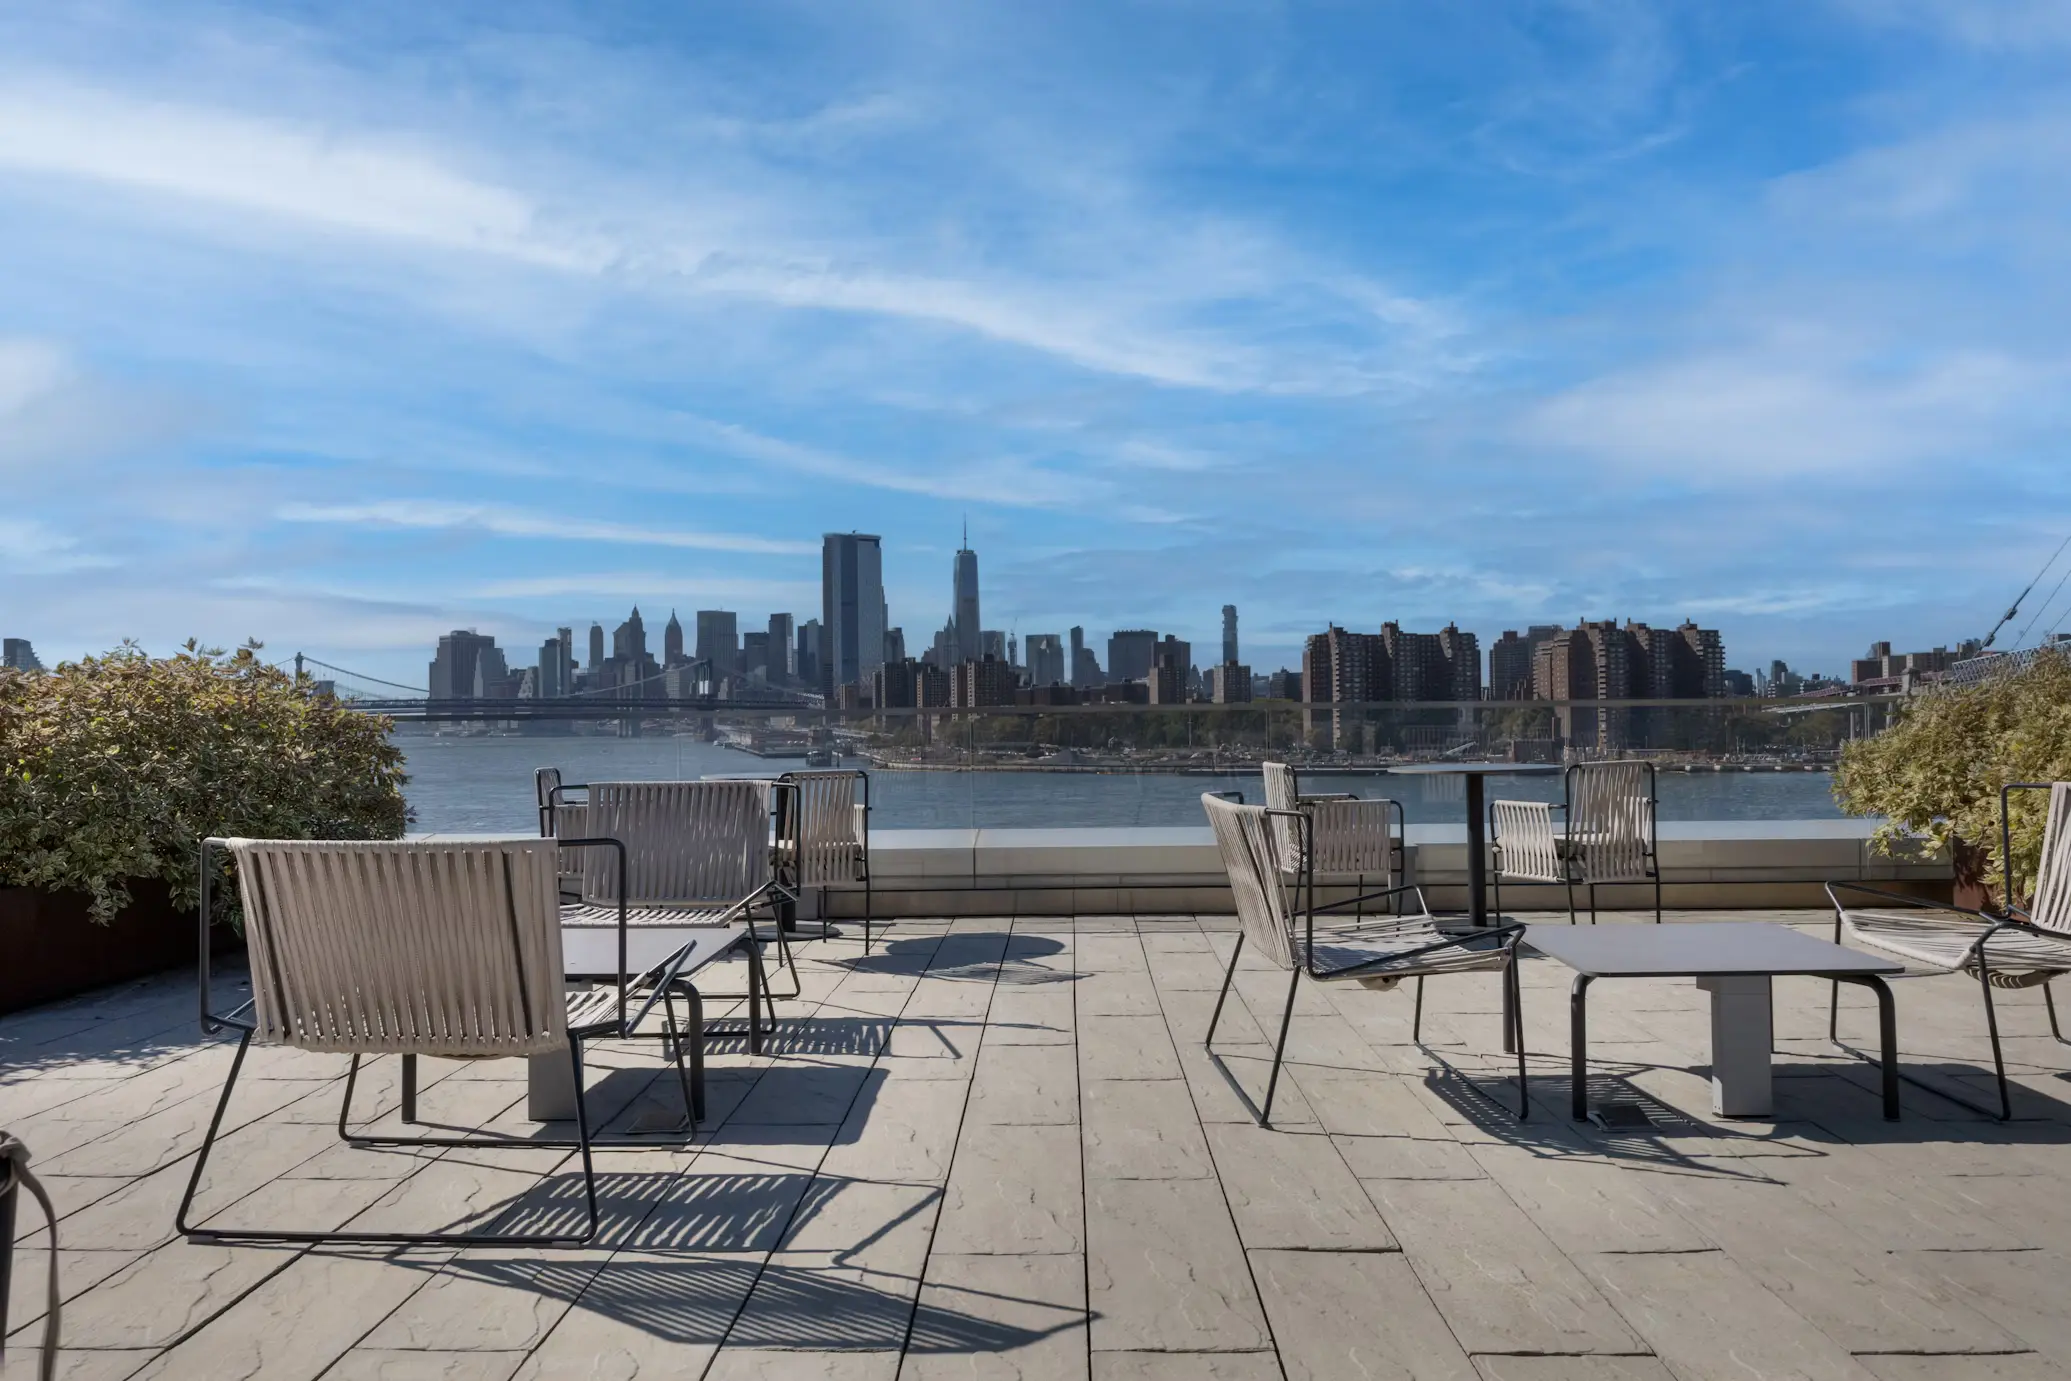 Rooftop Terrace with Modern Seating and Views of the Waterfront, Bridge, and NYC Skyline